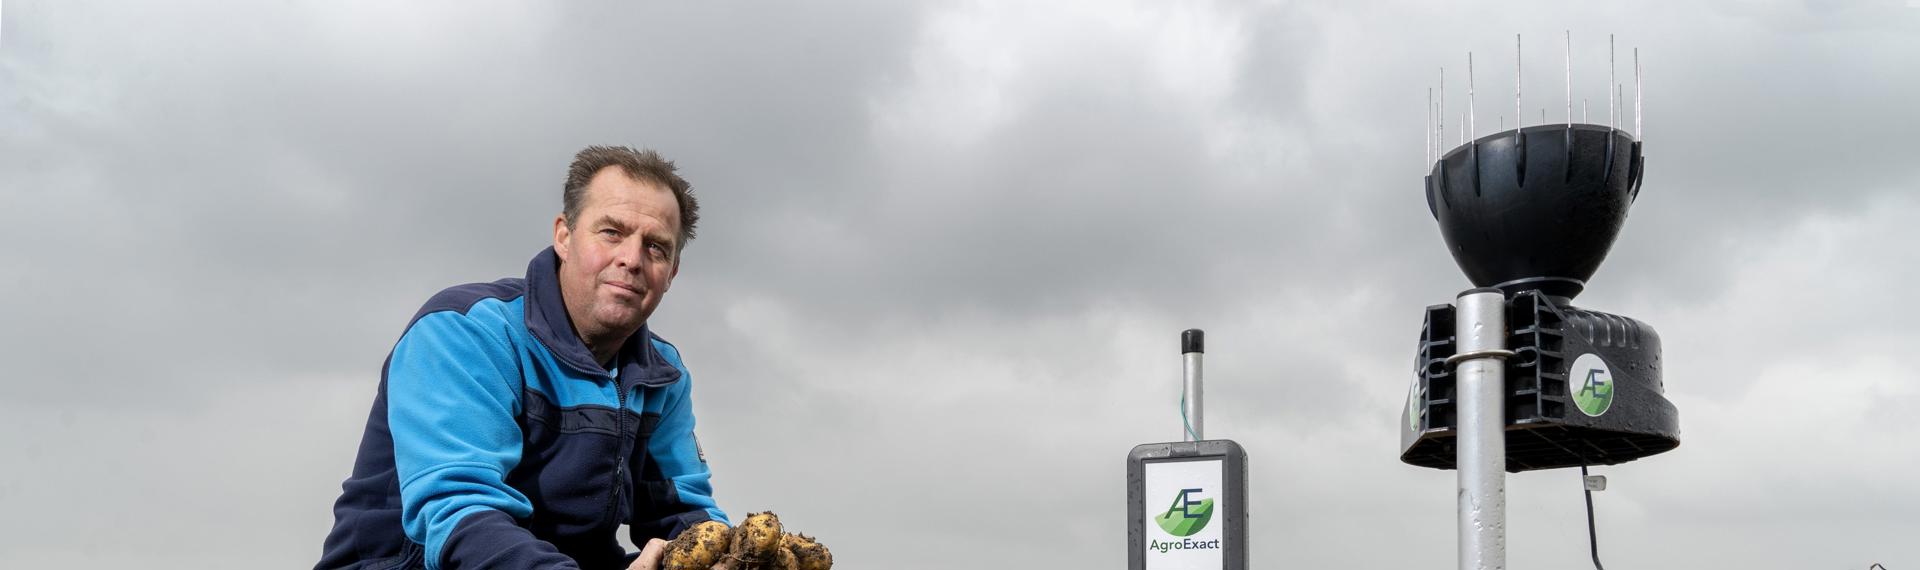 Farmer Jan Straver with the weather station of AgroExact